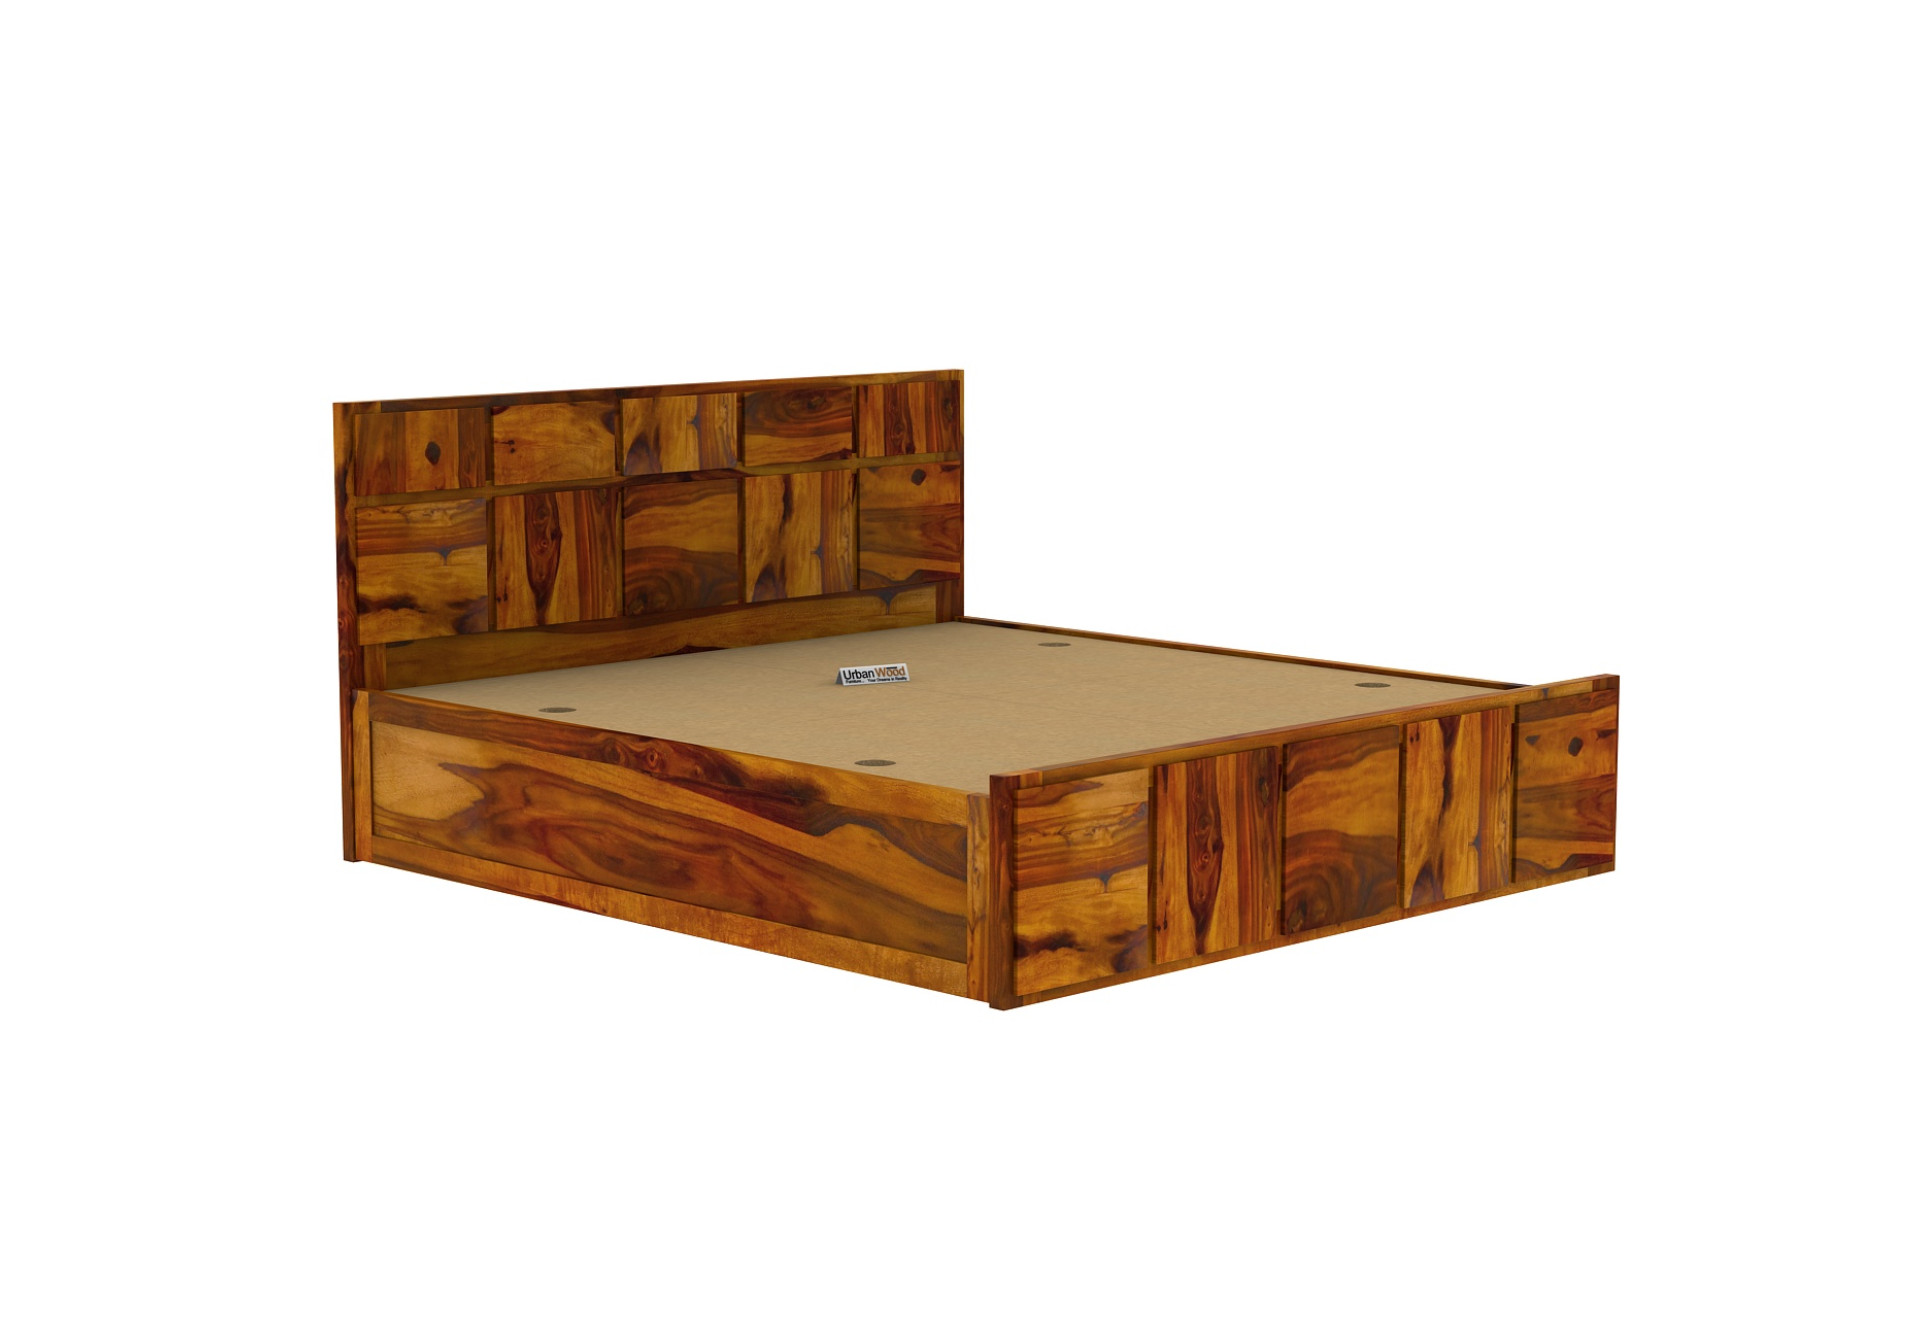 Bedswind Bed With Box Storage ( Queen Size, Honey Finish )